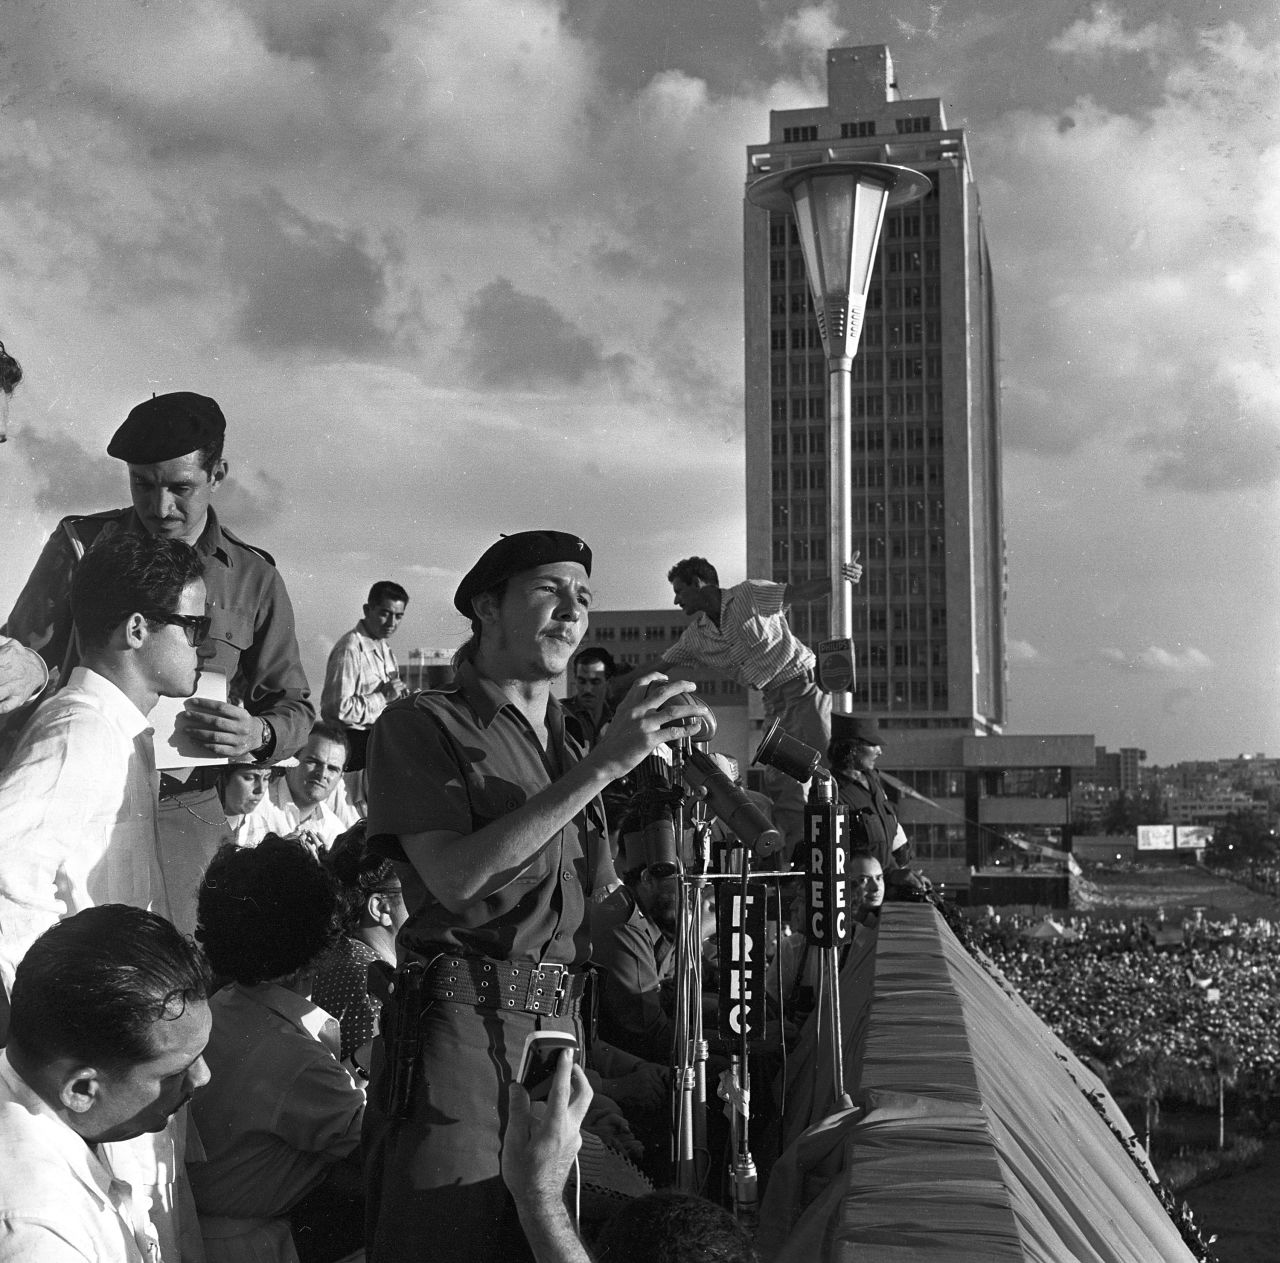 Castro speaks to a crowd in Havana on July 26, 1959, at an event marking the anniversary of the 1953 attack on the Moncada barracks. Castro's brother Fidel led the attempted coup against Fulgencio Batista's government. Both brothers were sentenced to 15 years in prison but were released less than two years later as part of an amnesty for political prisoners. The attack on the military barracks is viewed as the beginning of the Cuban Revolution.